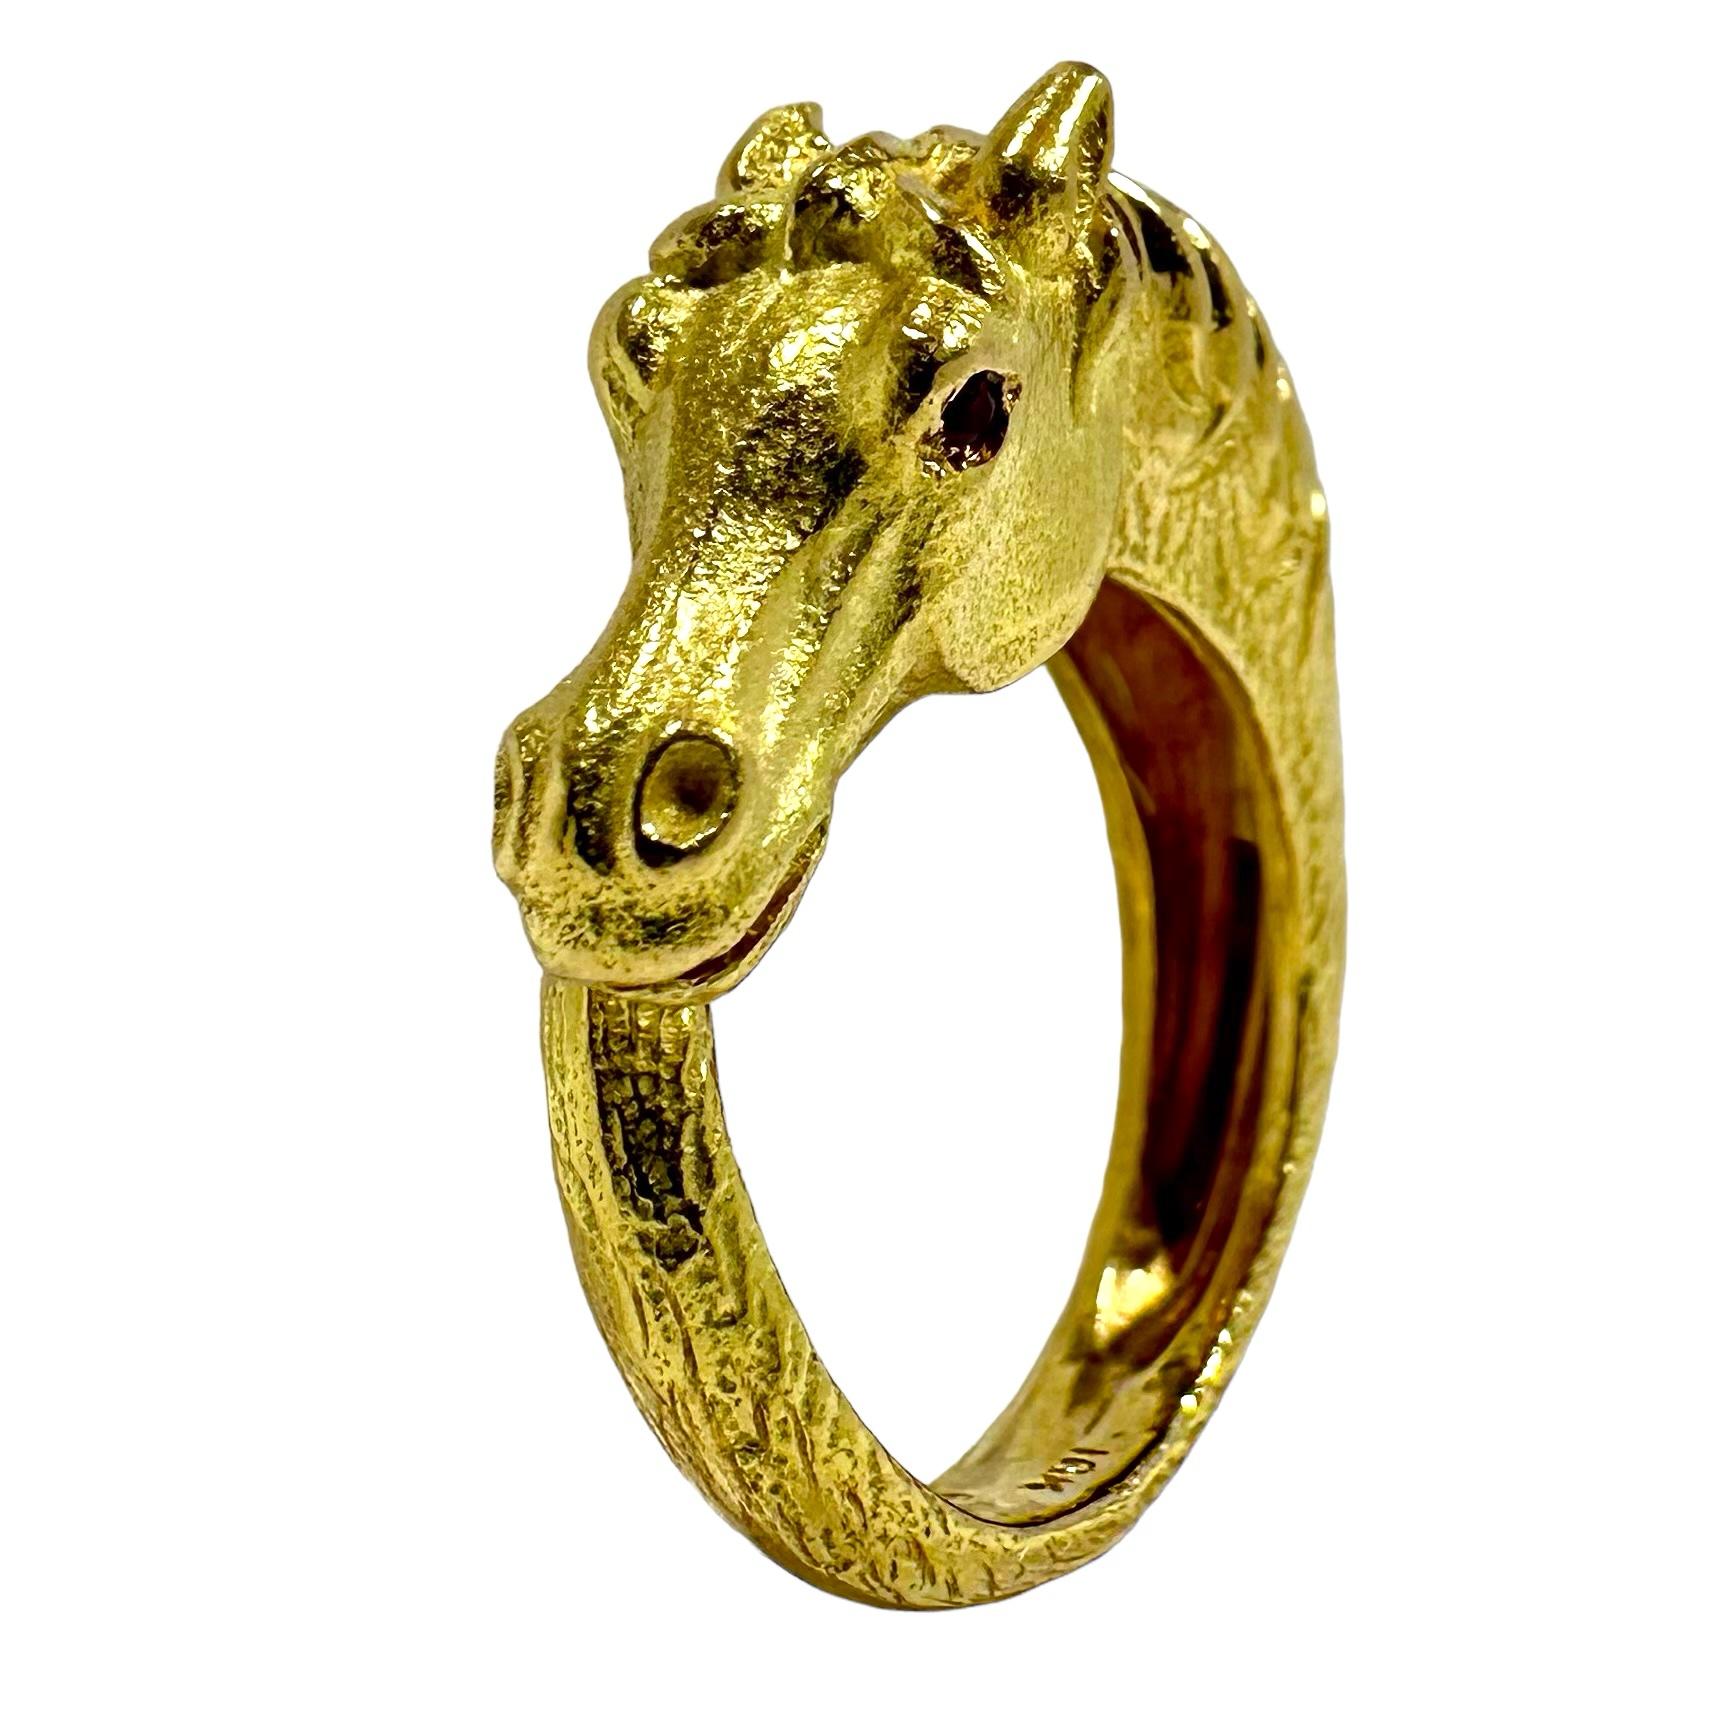  Lifelike Vintage George Lederman 18k Gold Equestrian Ring with Ruby Eyes In Good Condition For Sale In Palm Beach, FL